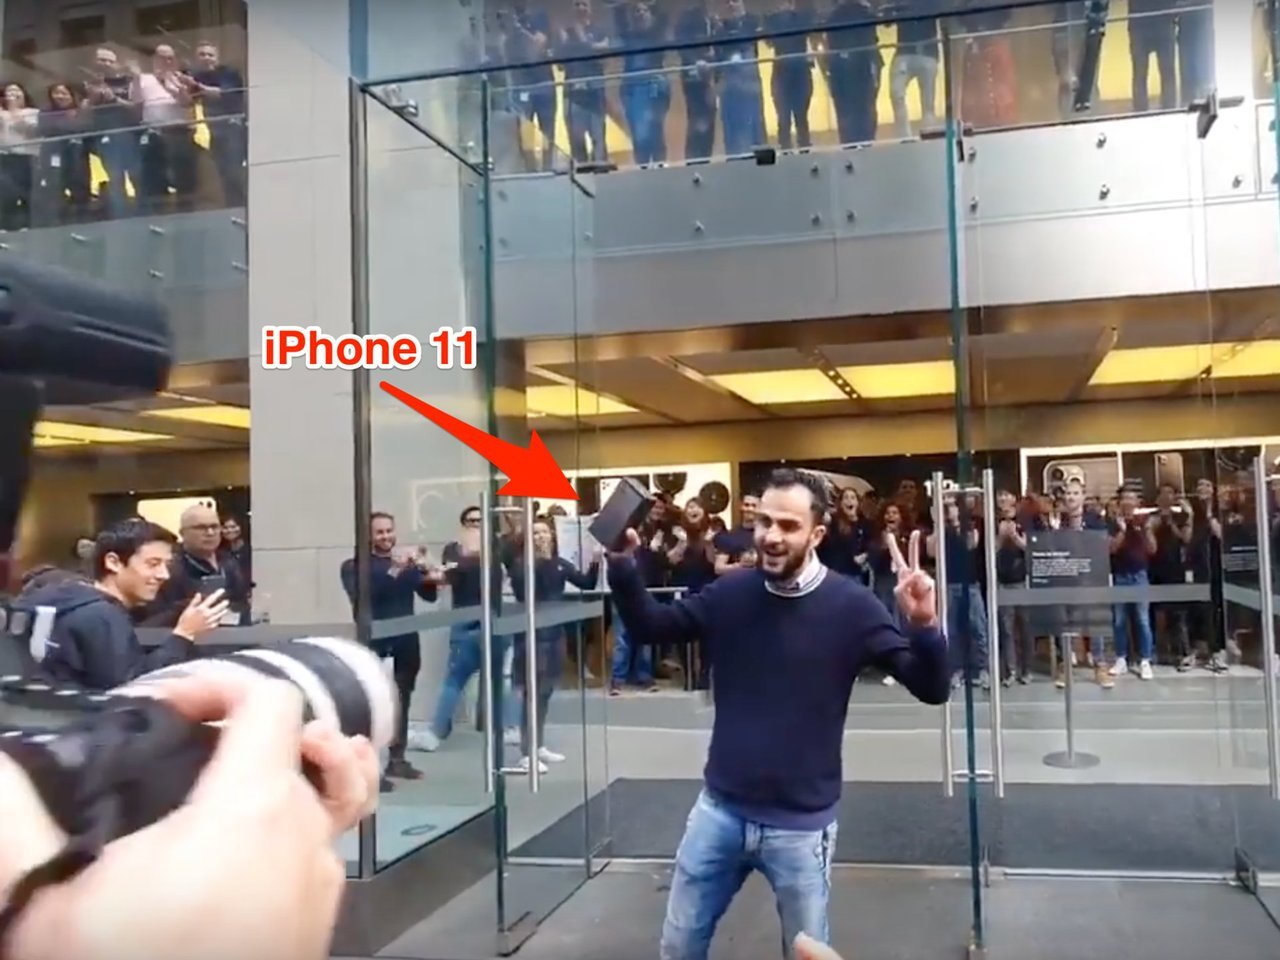 A baffling viral video shows Apple employees in a standing ovation after man buys iPhone 11